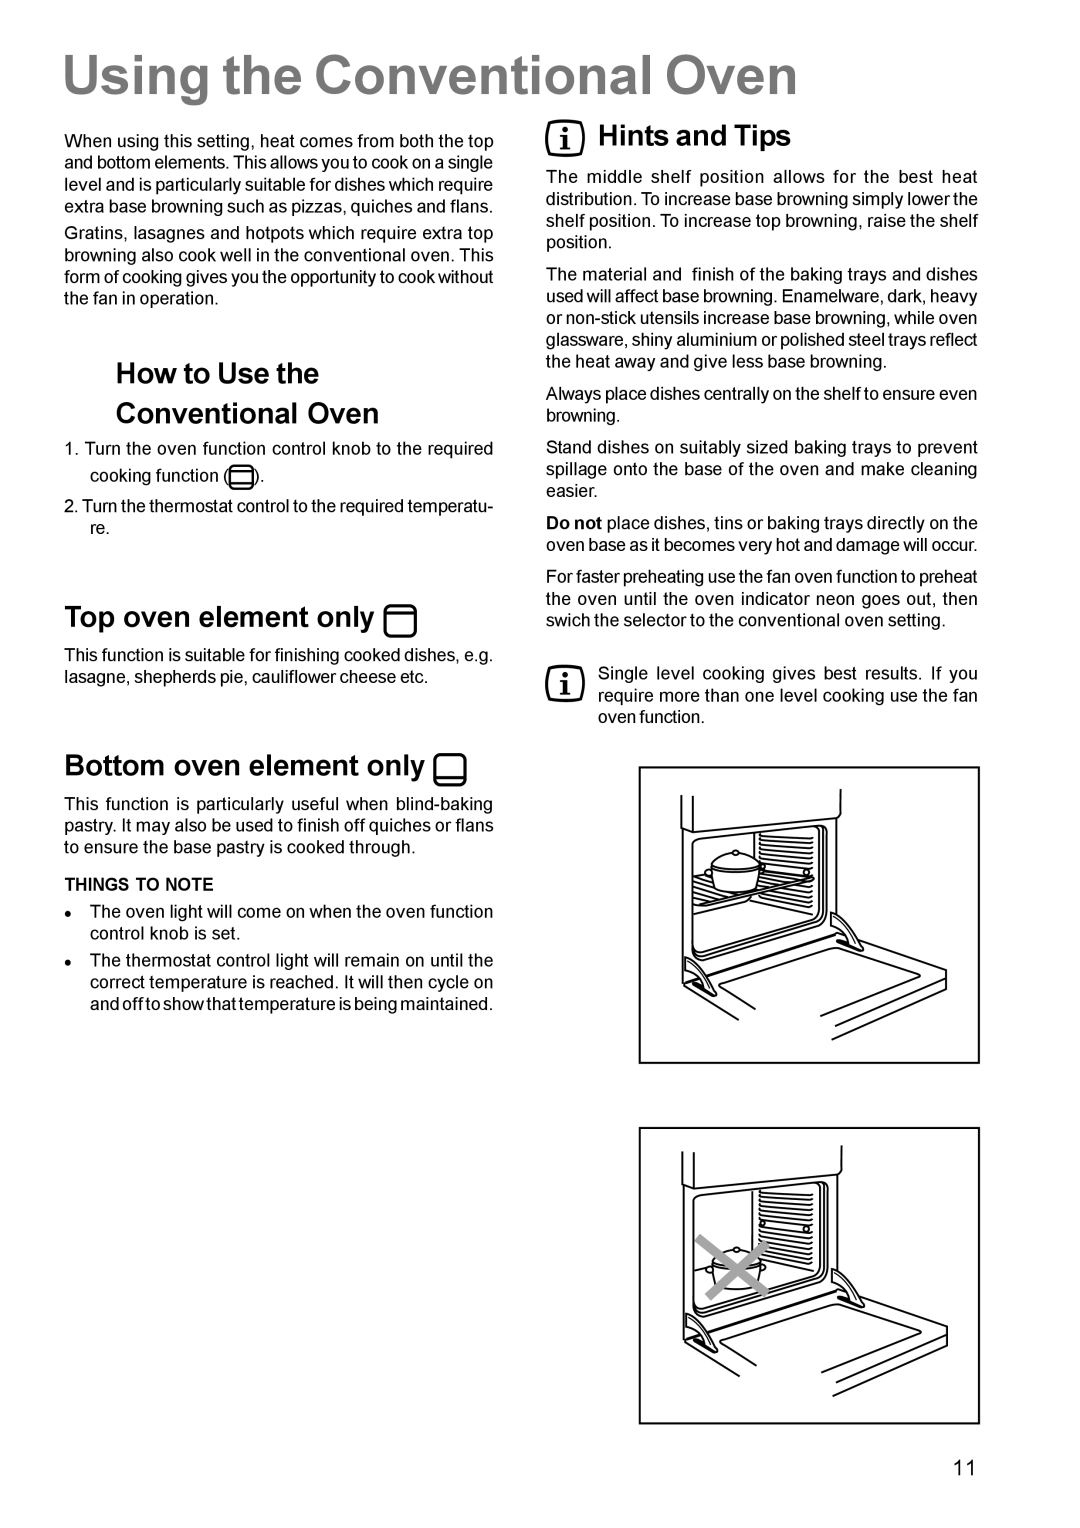 Zanussi ZCM 630 manual Using the Conventional Oven, How to Use the Conventional Oven, Top oven element only, Hints and Tips 